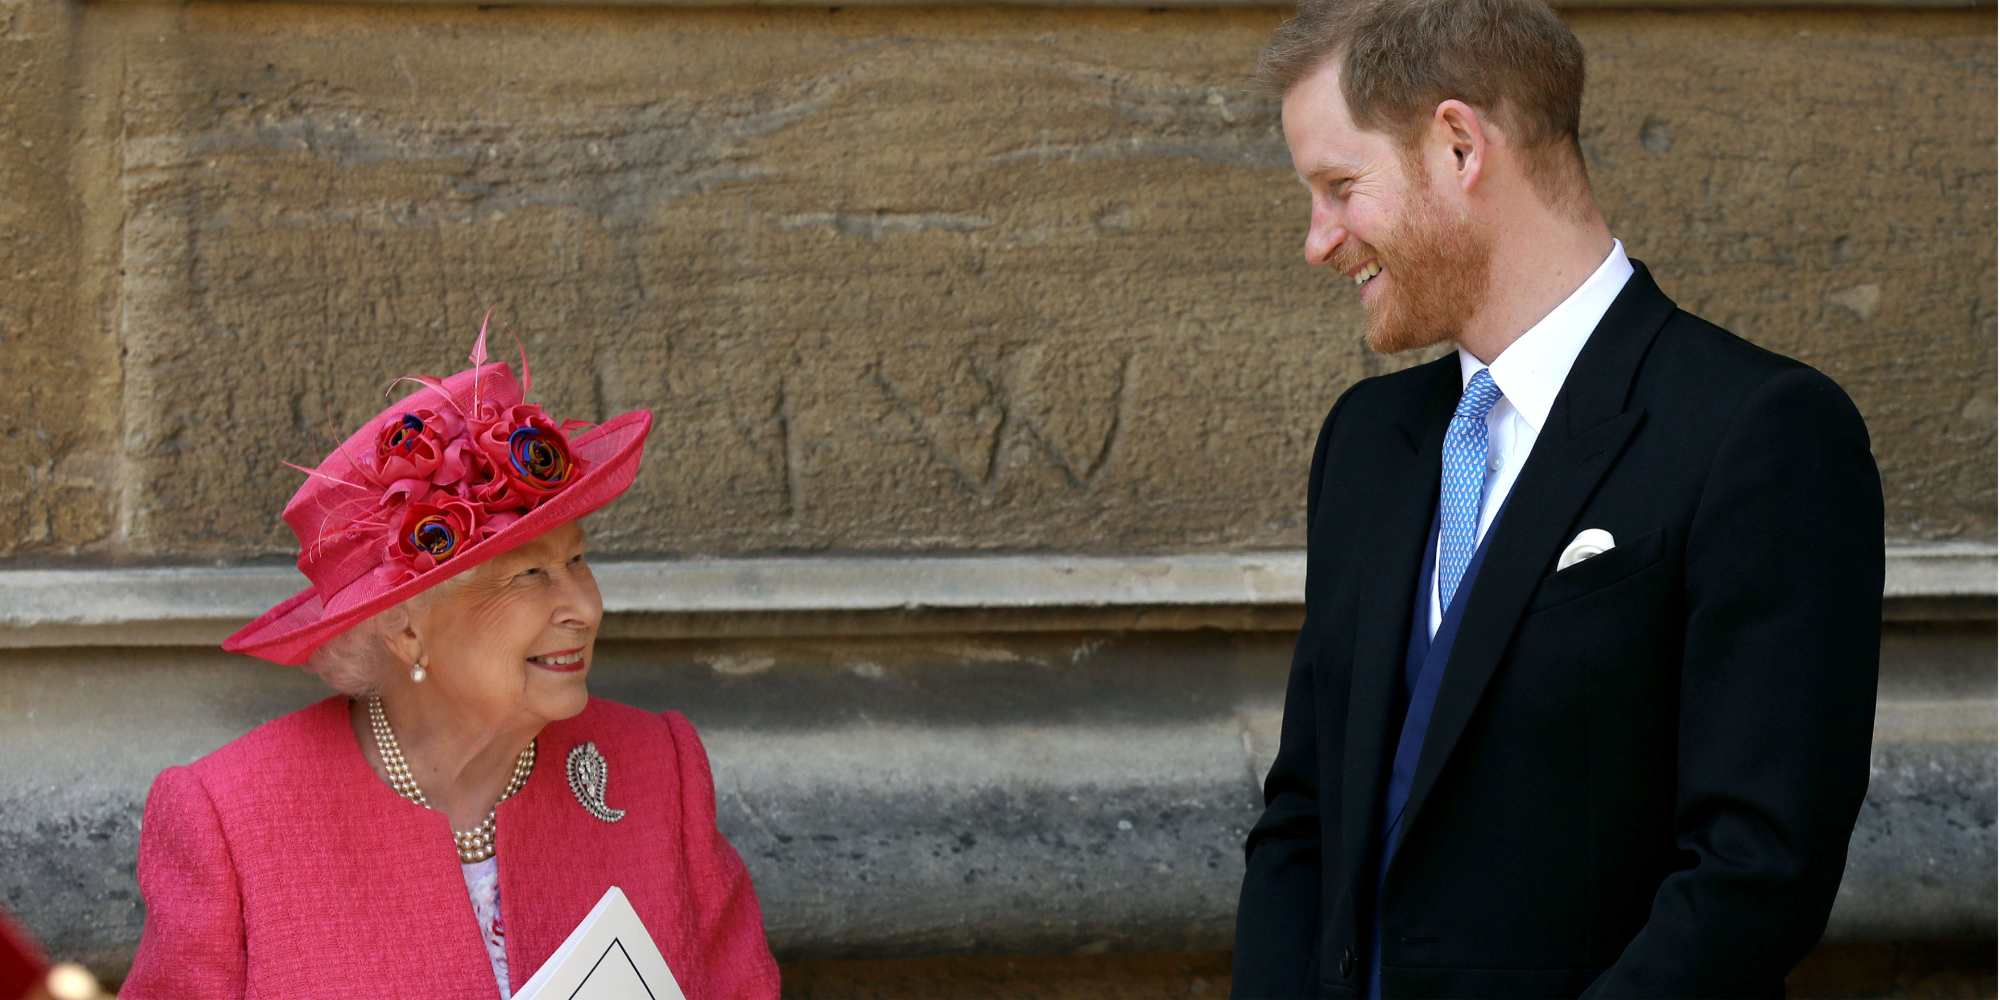 Queen Elizabeth and Prince Harry at the wedding of Lady Gabriella Windsor to Thomas Kingston at St George's Chapel, Windsor Castle on May 18, 2019 in Windsor, England.